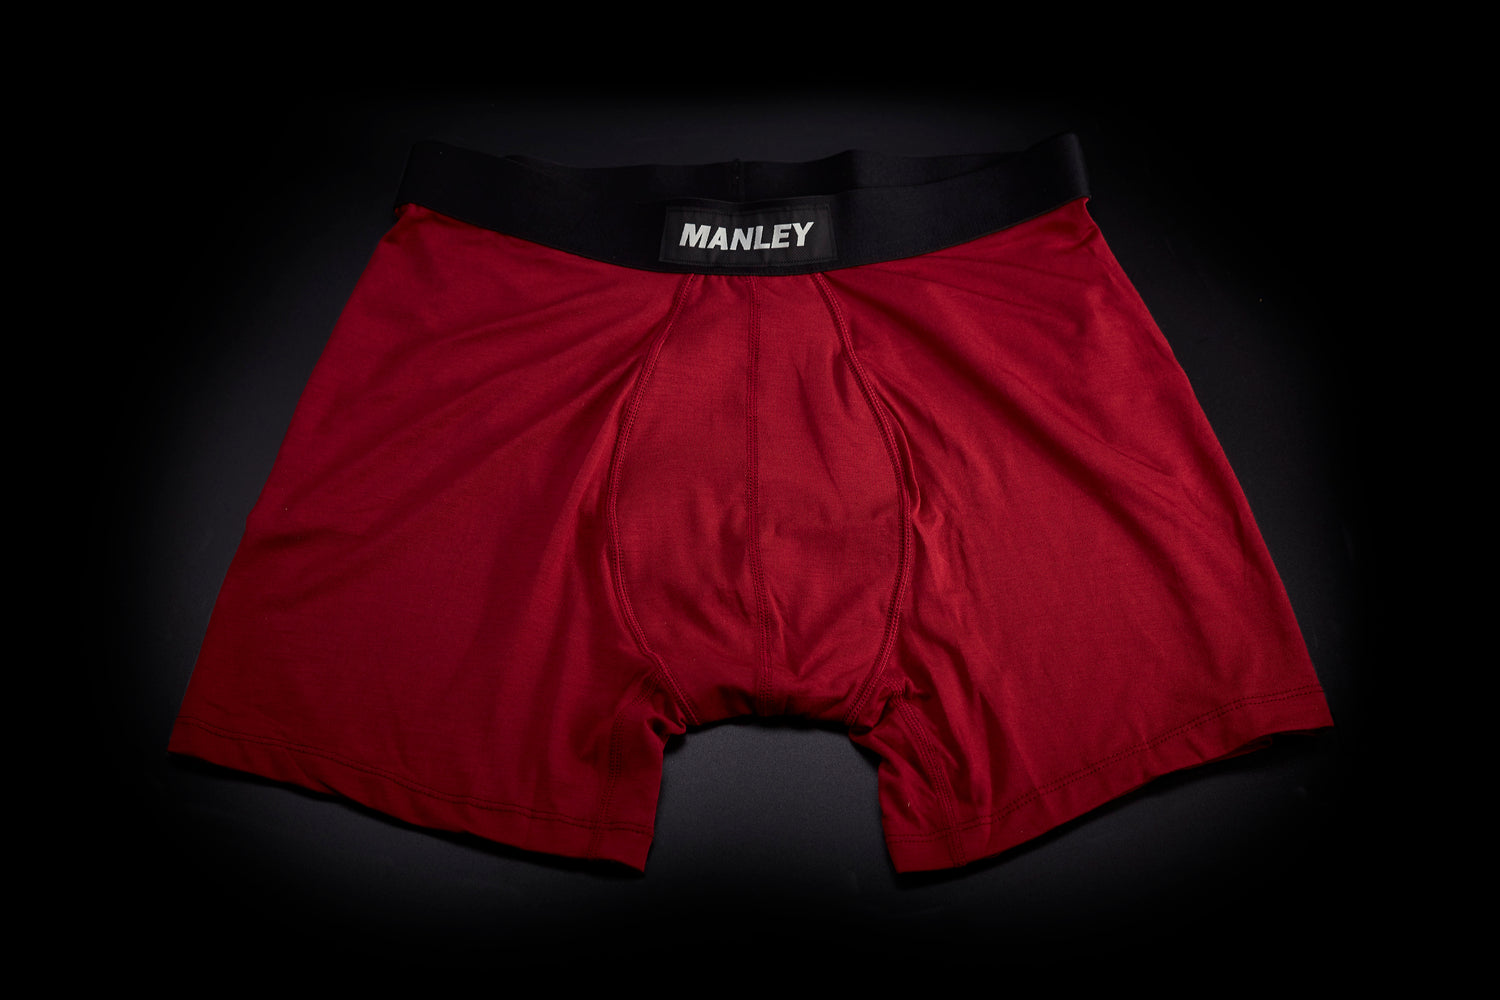 Underwear that Stops the Pee Spot  Well Red – Manley Barrier Apparel